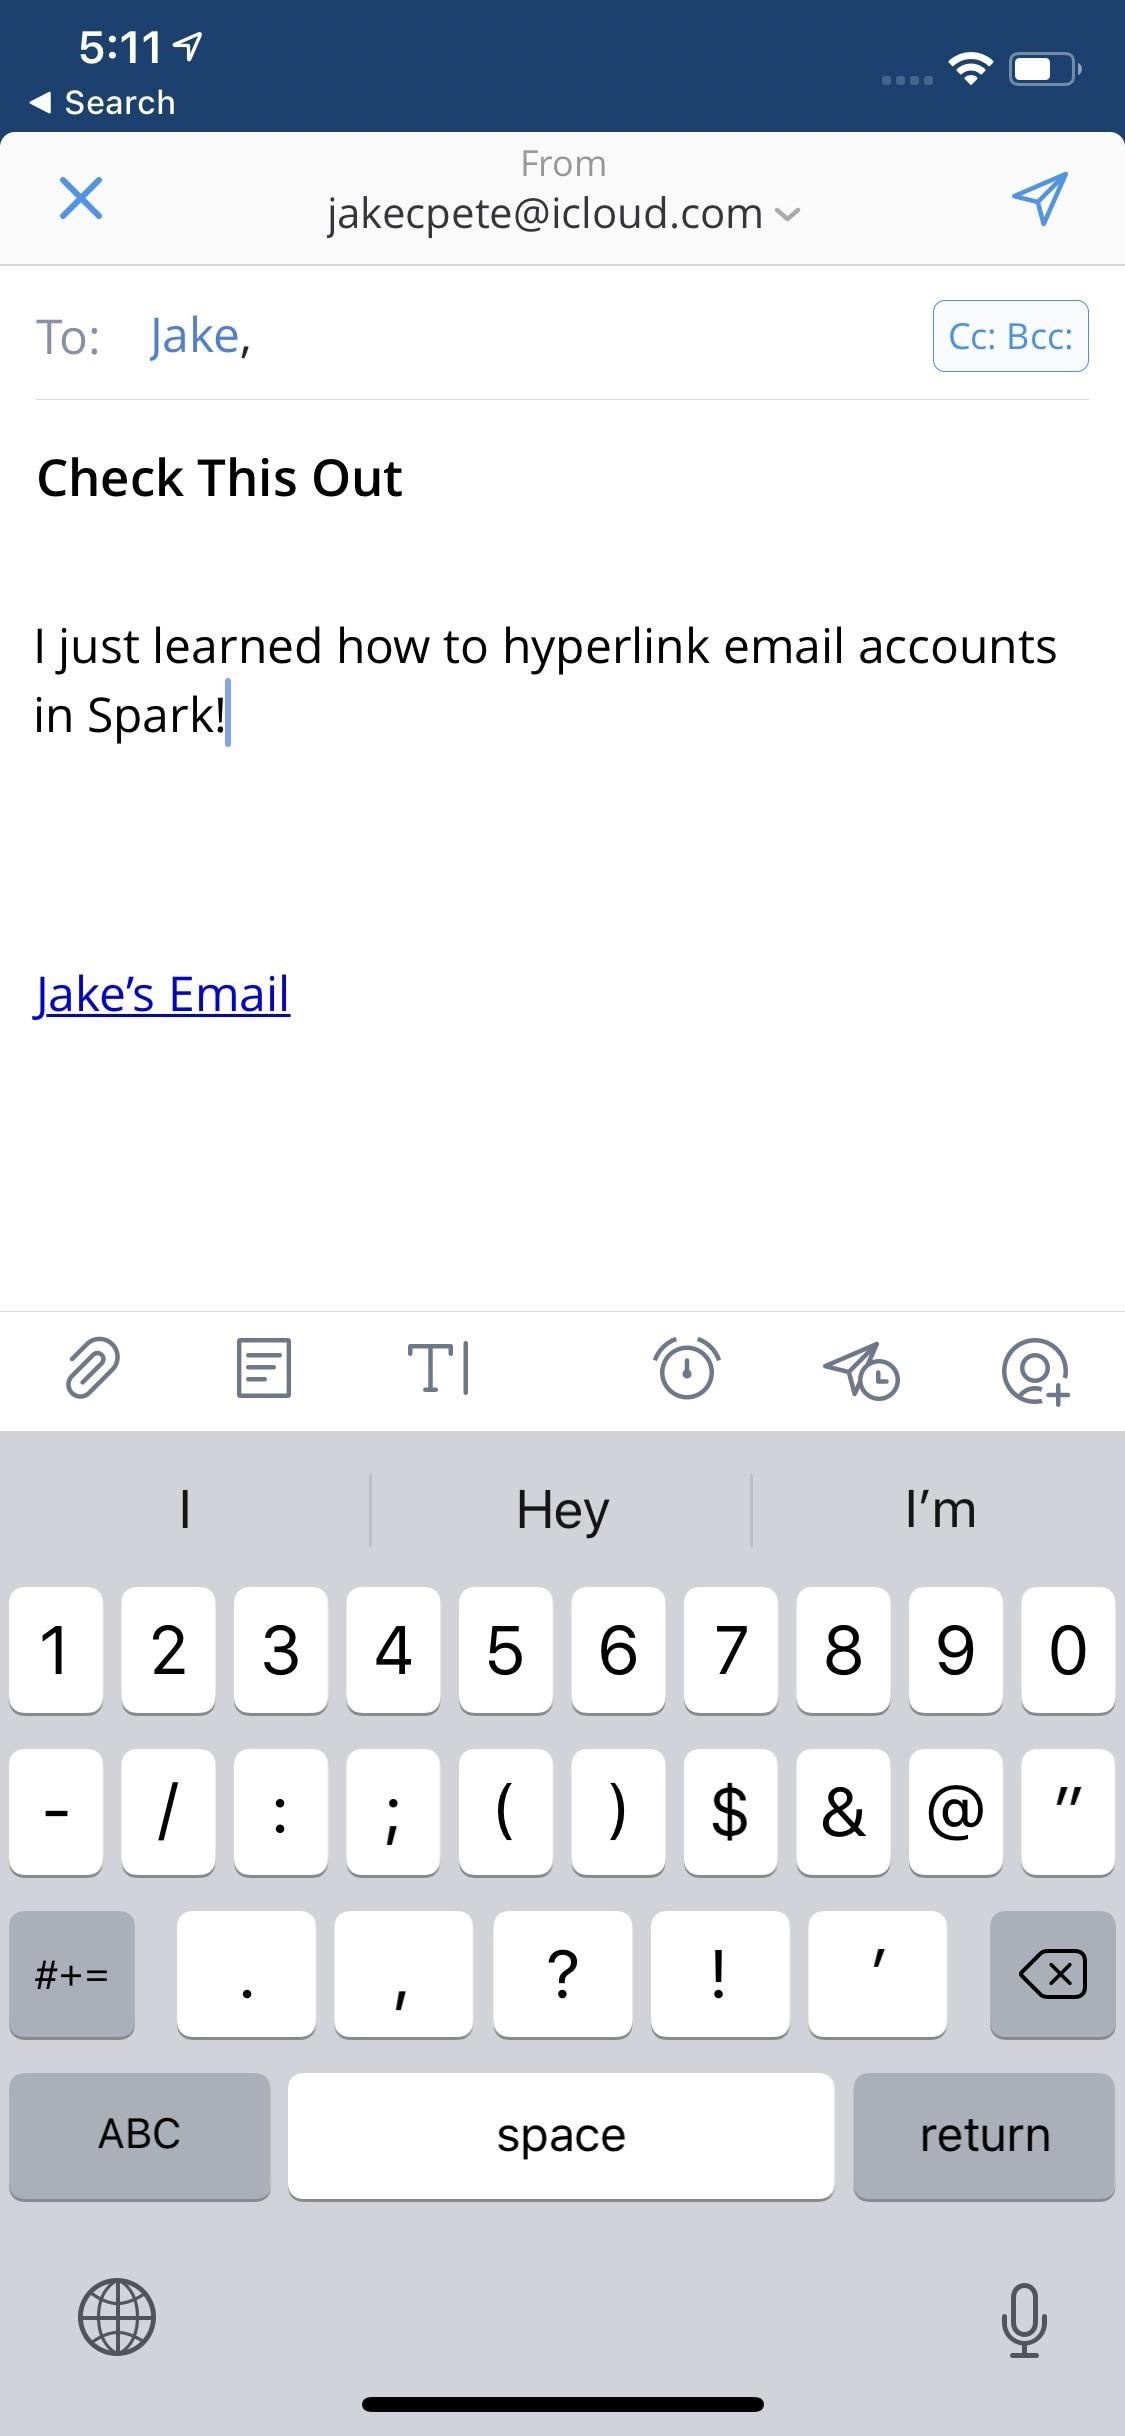 How to Add Hyperlinks to Your Emails in Spark for Cleaner-Looking Messages